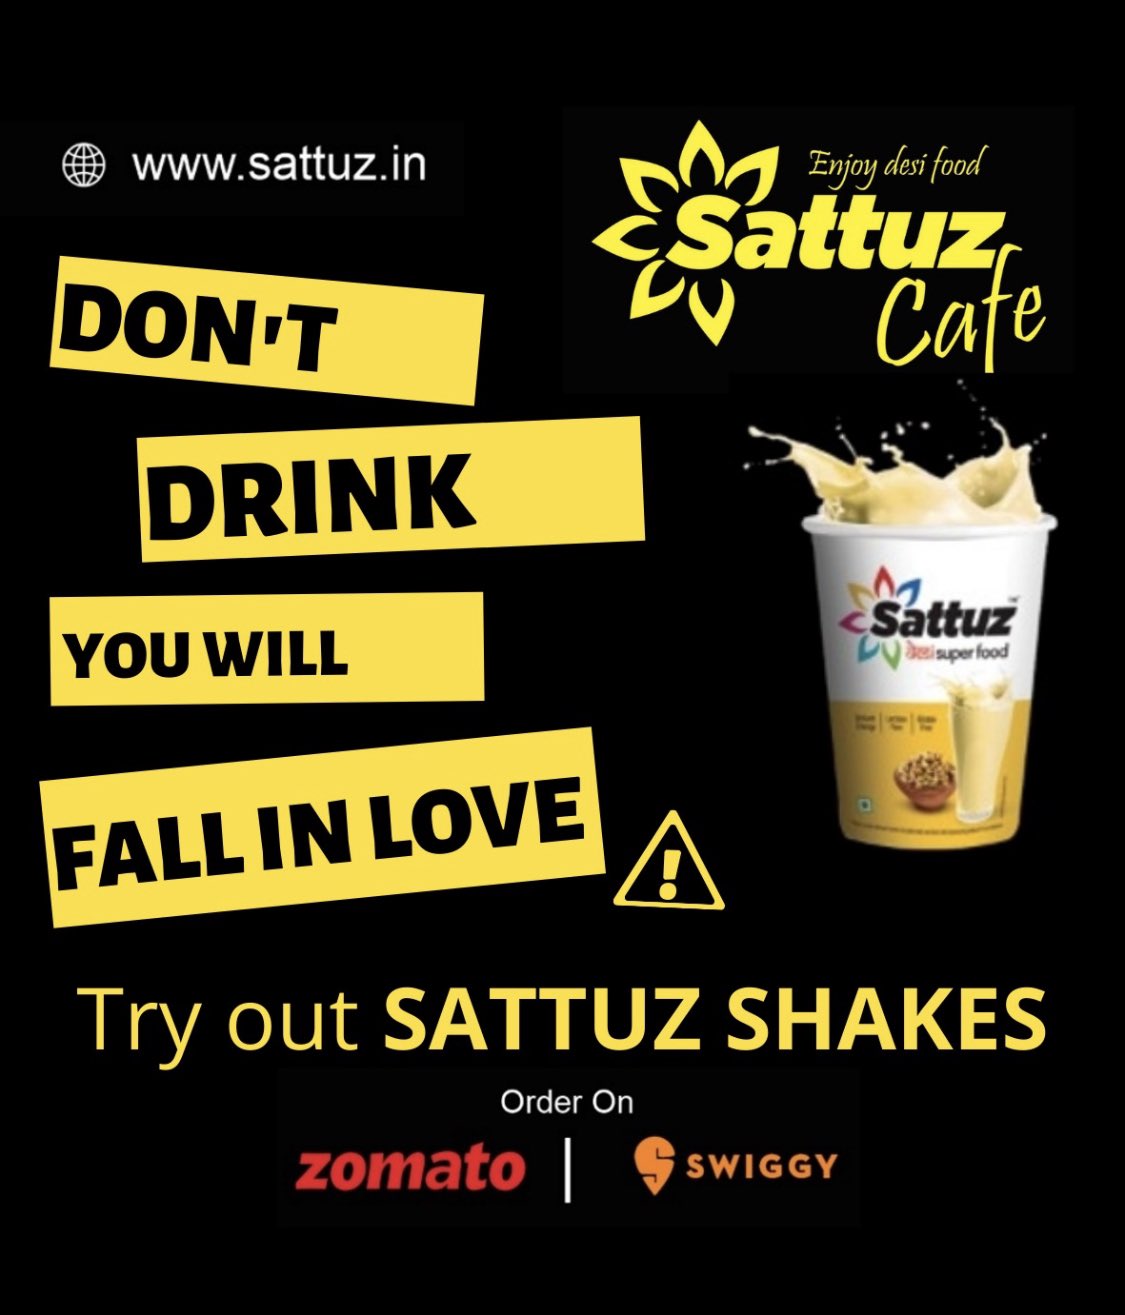 sattuzofficial on twitter: "come fall in love with the health drink revolution …❤️ shaking the world with our sattuz shakes …🤘 order now on zomato and swiggy ✓ search sattuz cafe in